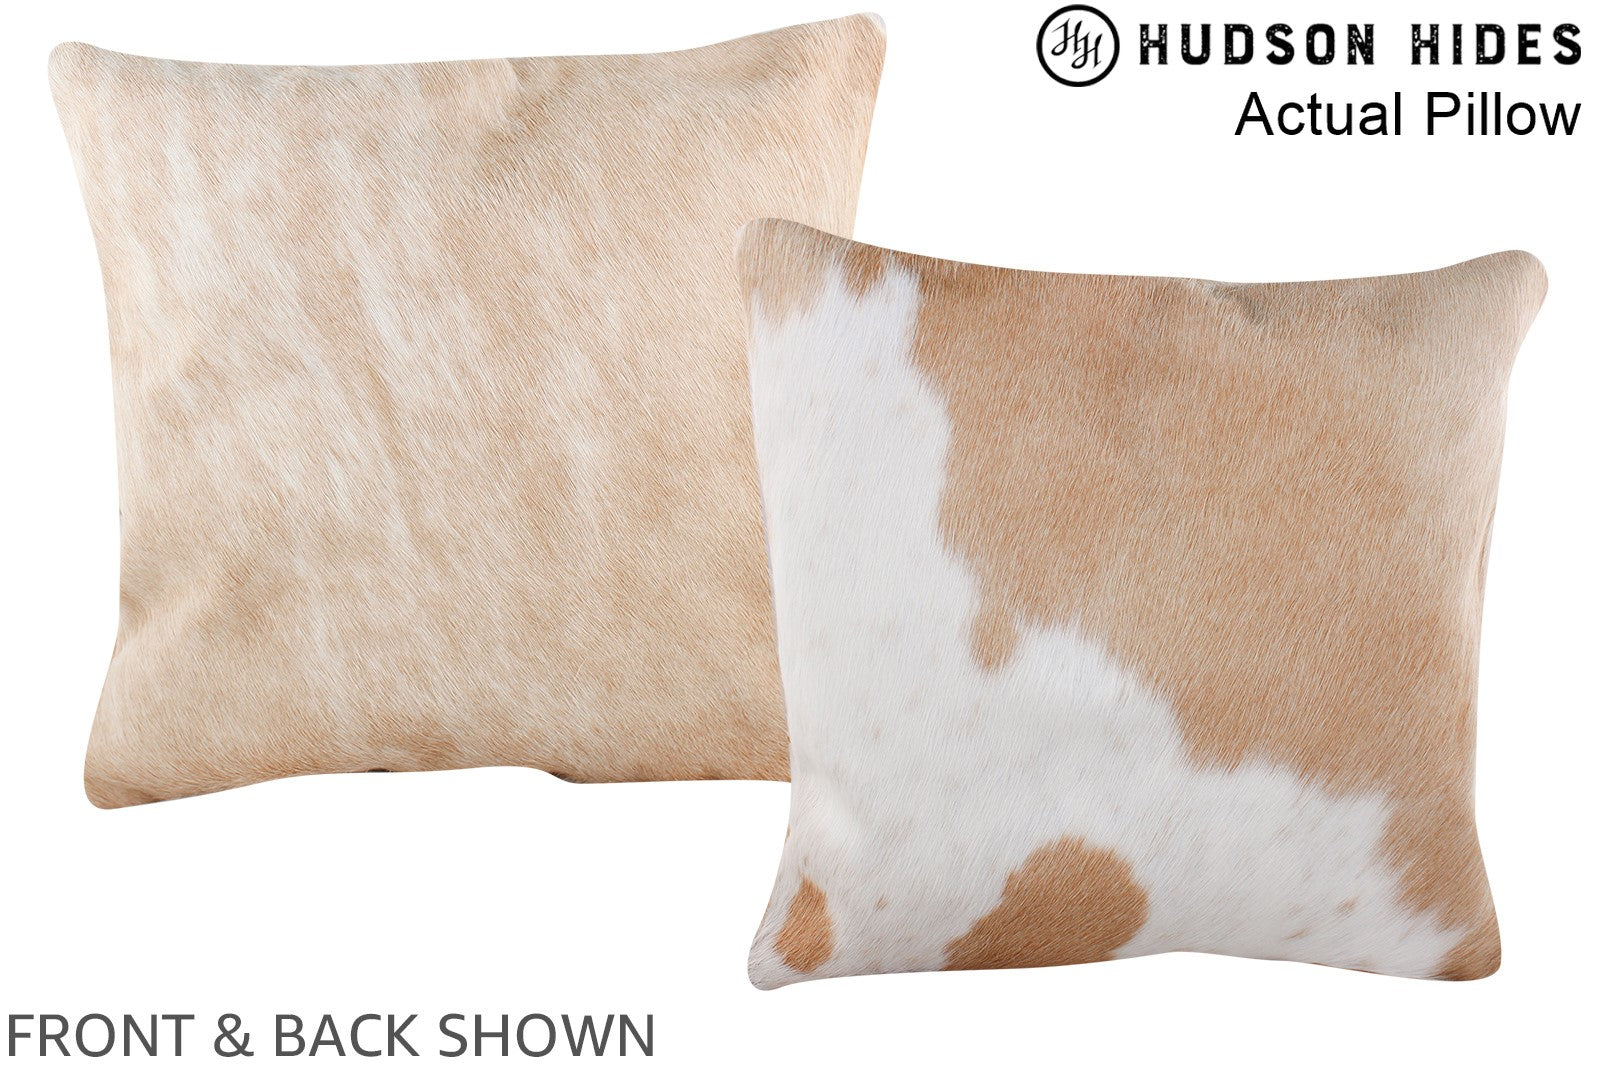 Beige and White Cowhide Pillow #A13677